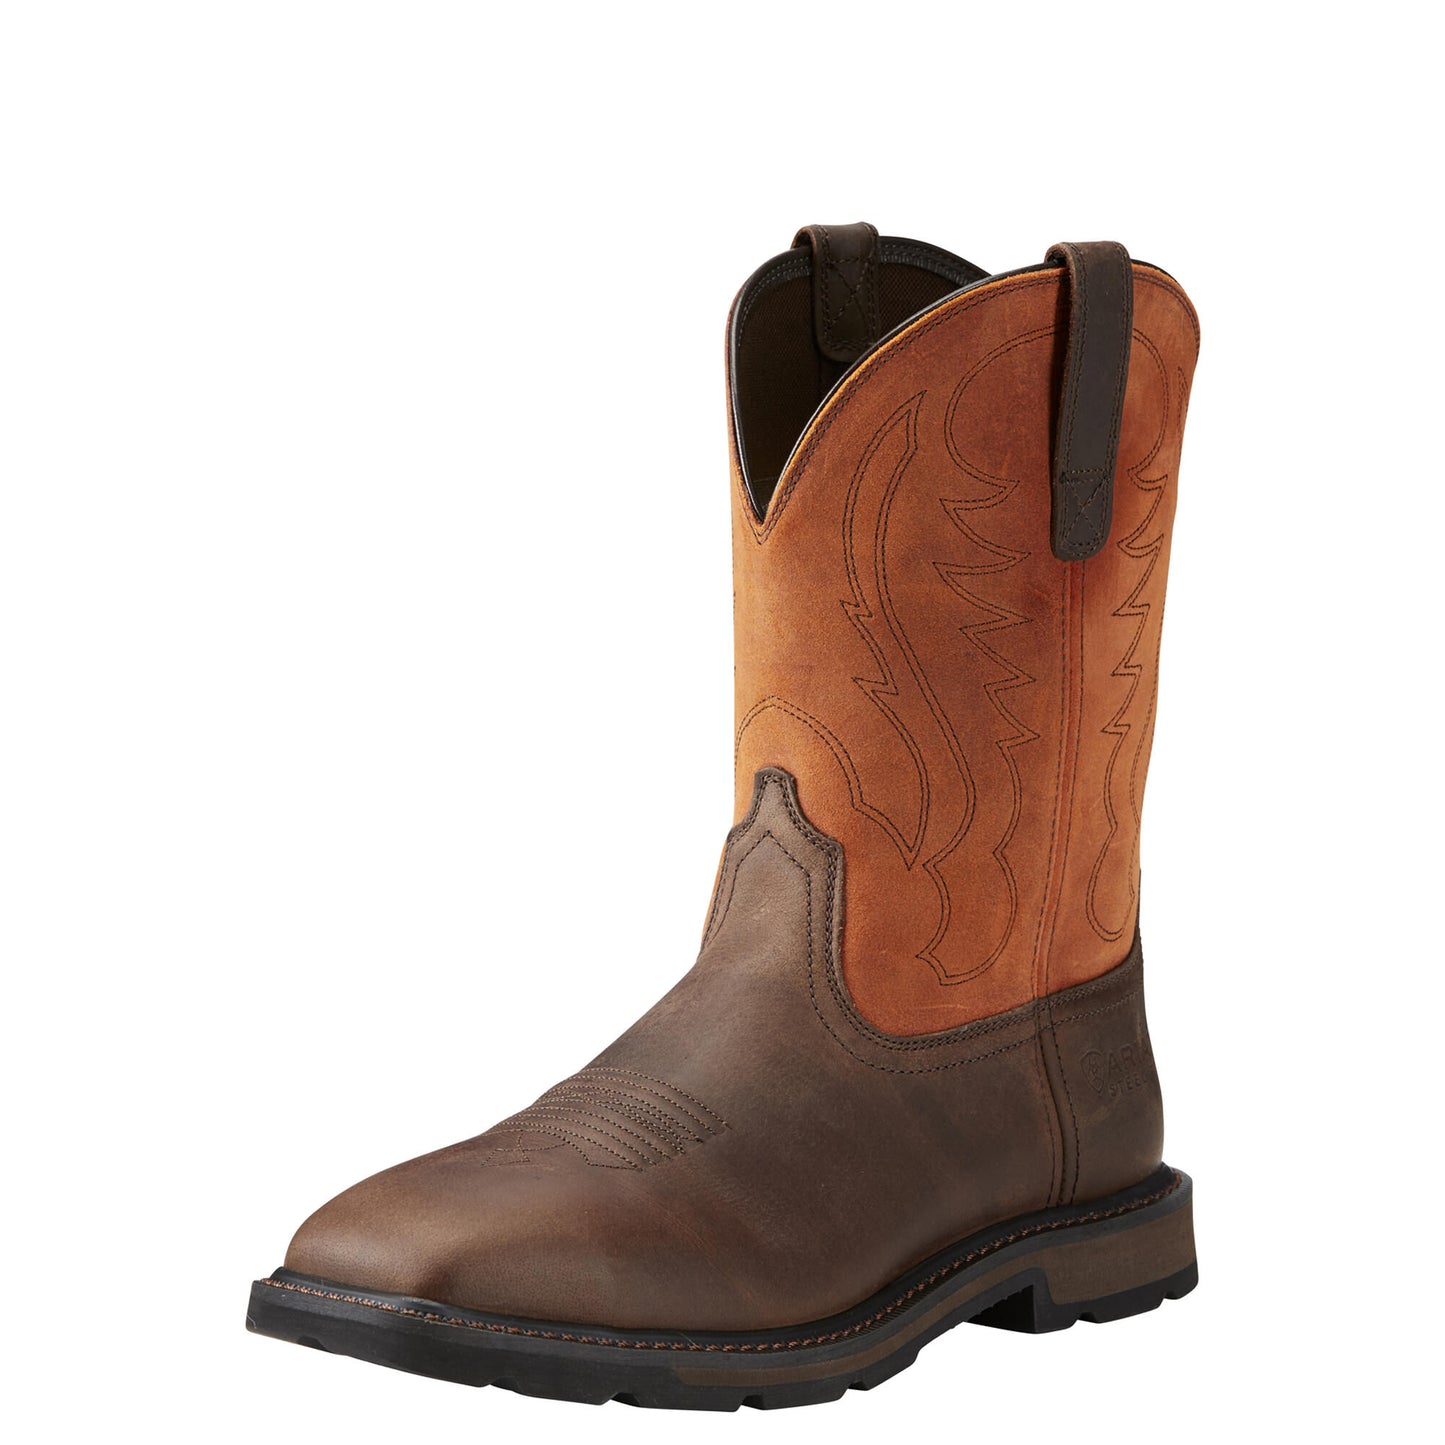 Ariat Men's Groundbreaker Wide Square Steel Toe Boot - Brown/Ember - French's Boots